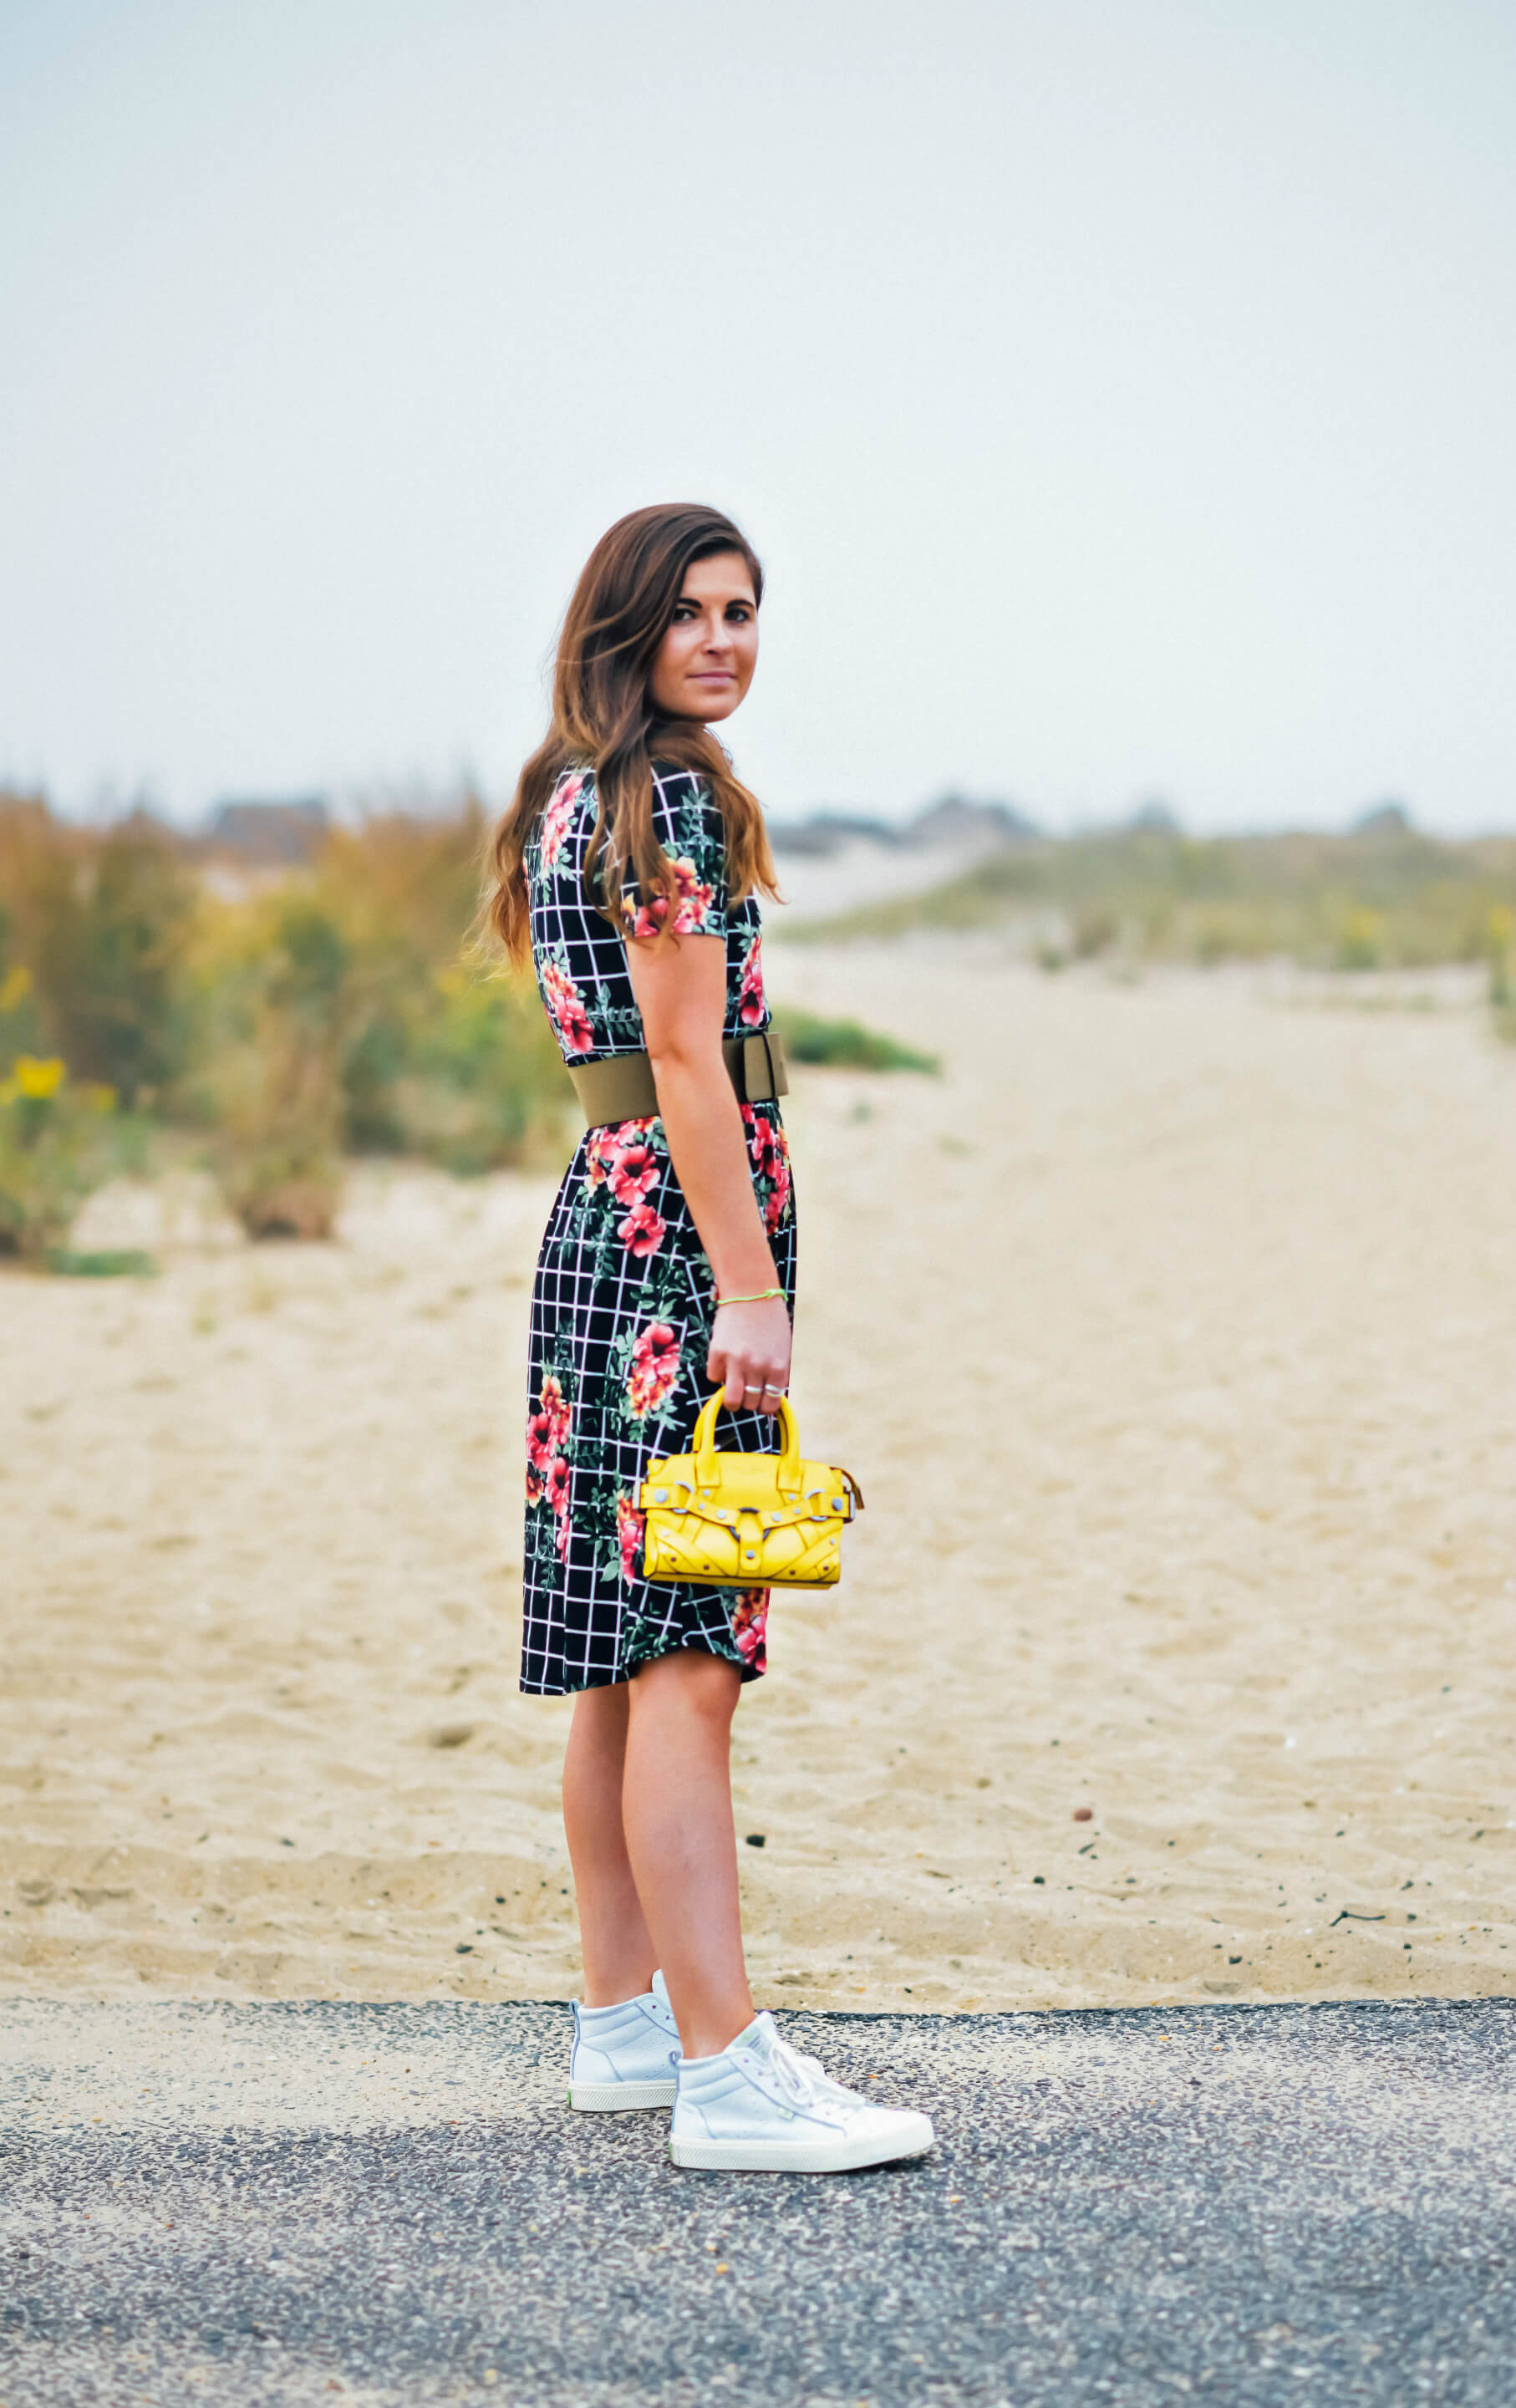 Forever 21 Floral Grid Surplice Dress, Fall Style, Dress and Sneakers Outfit, Cariuma White Leather OCA High Sneakers, Henri Bendel Yellow Mini Bag, Tilden of To Be Bright